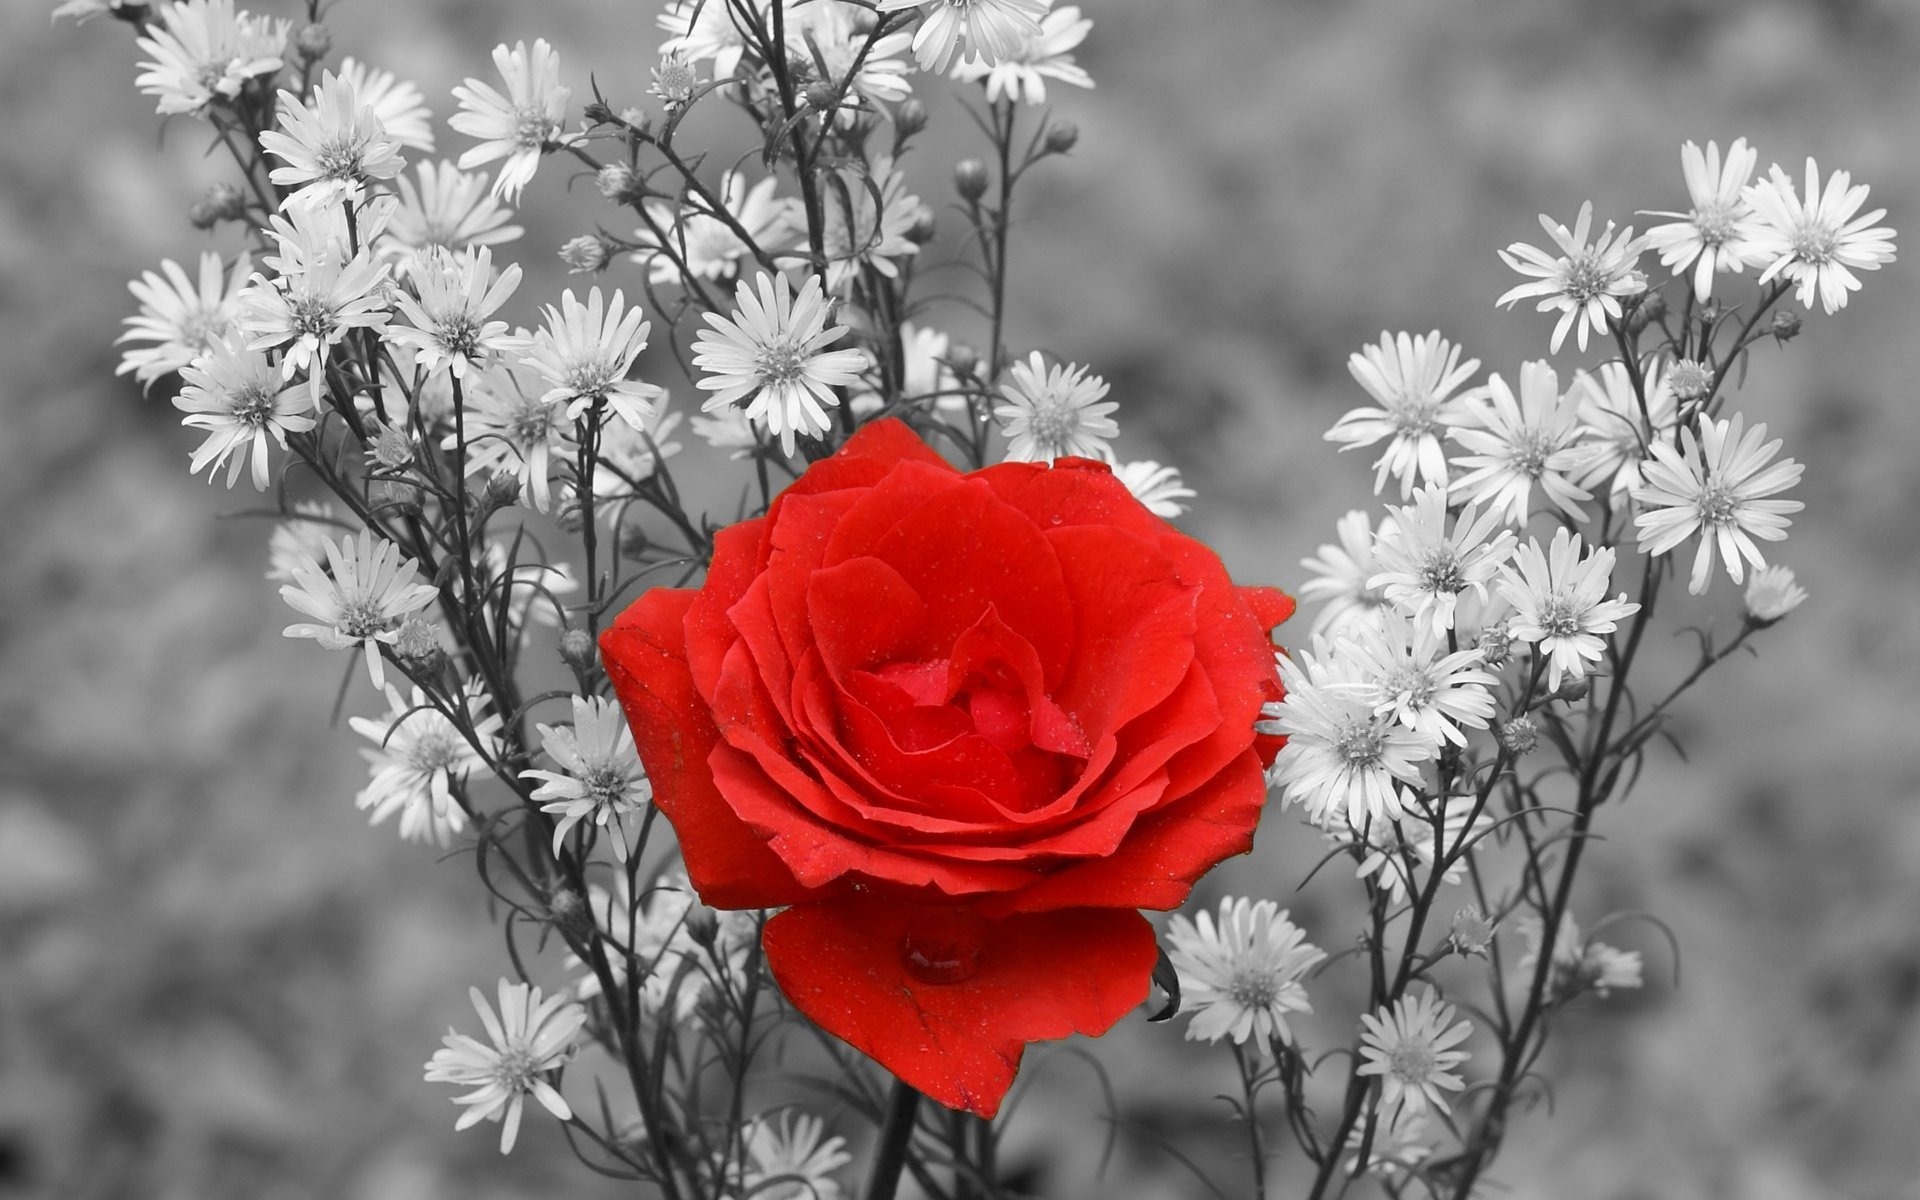 earth, rose, flower, red rose, selective color